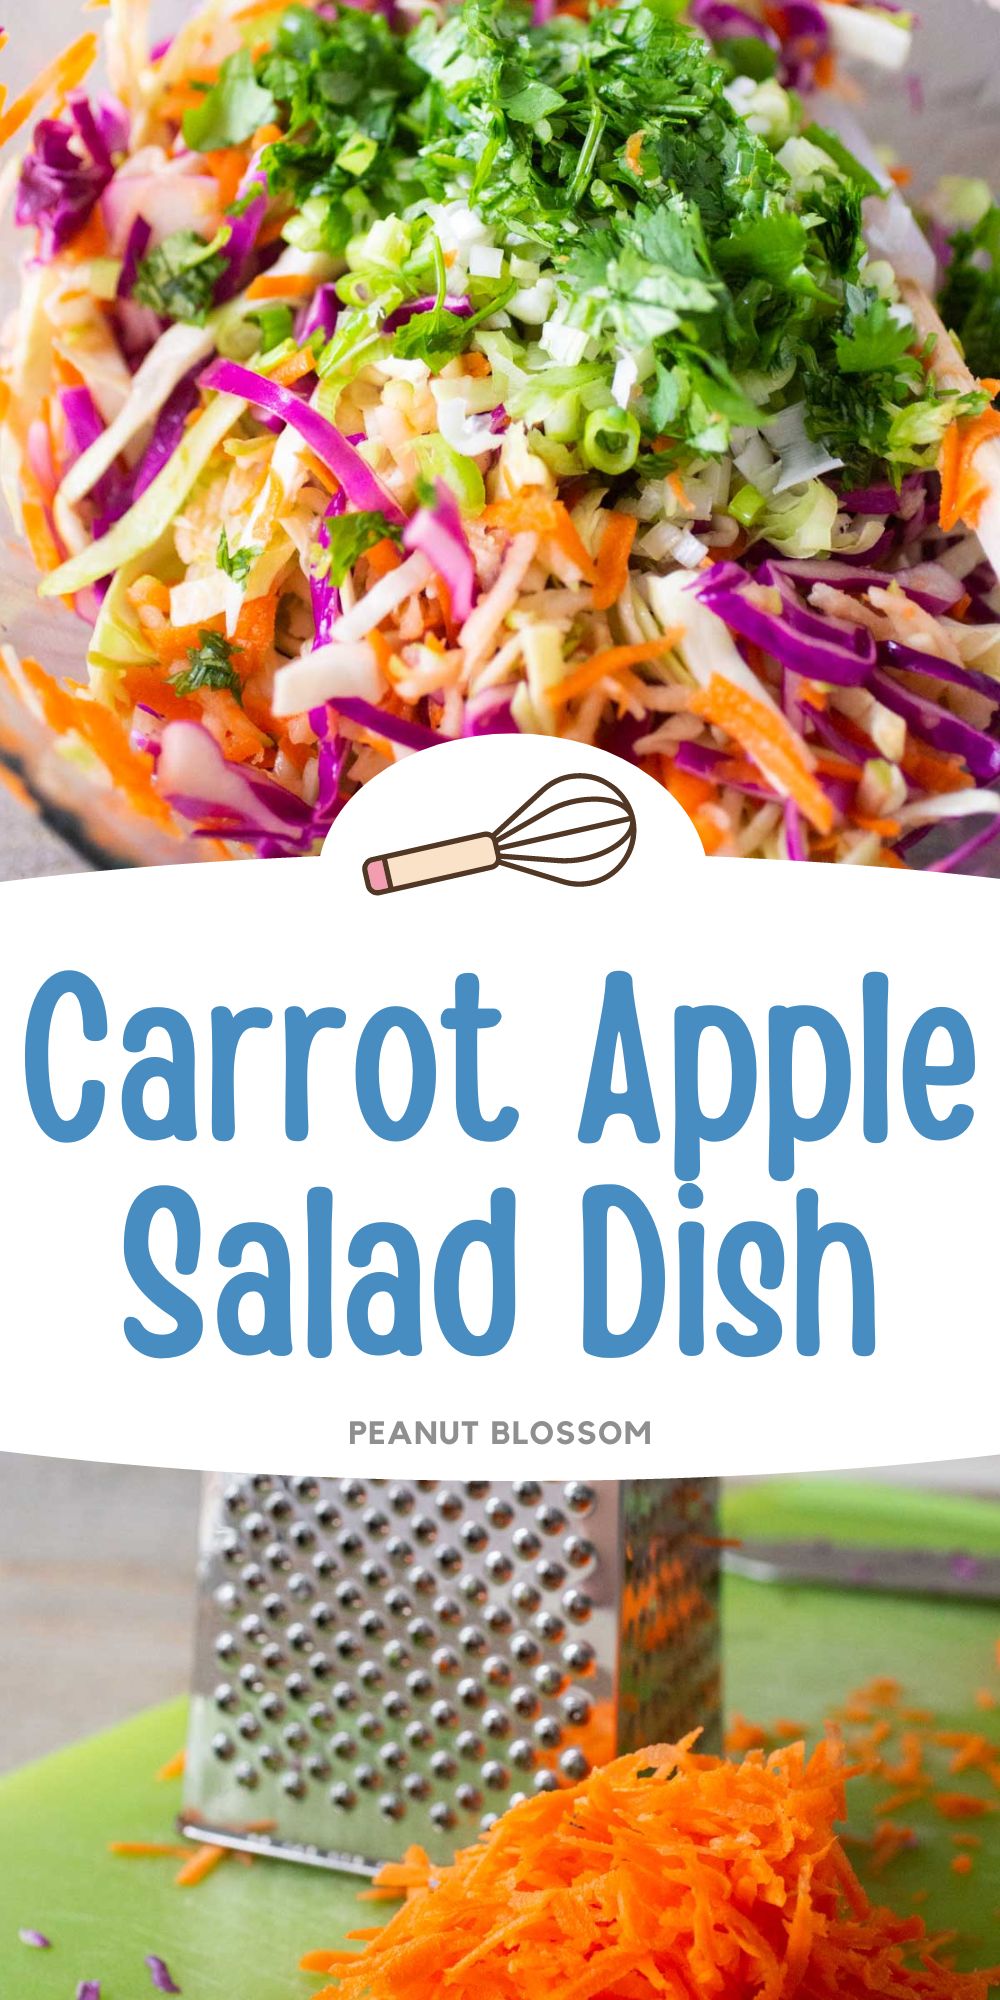 The photo collage shows the shredded carrot and apple salad on top and a carrot being grated by a box grater below.